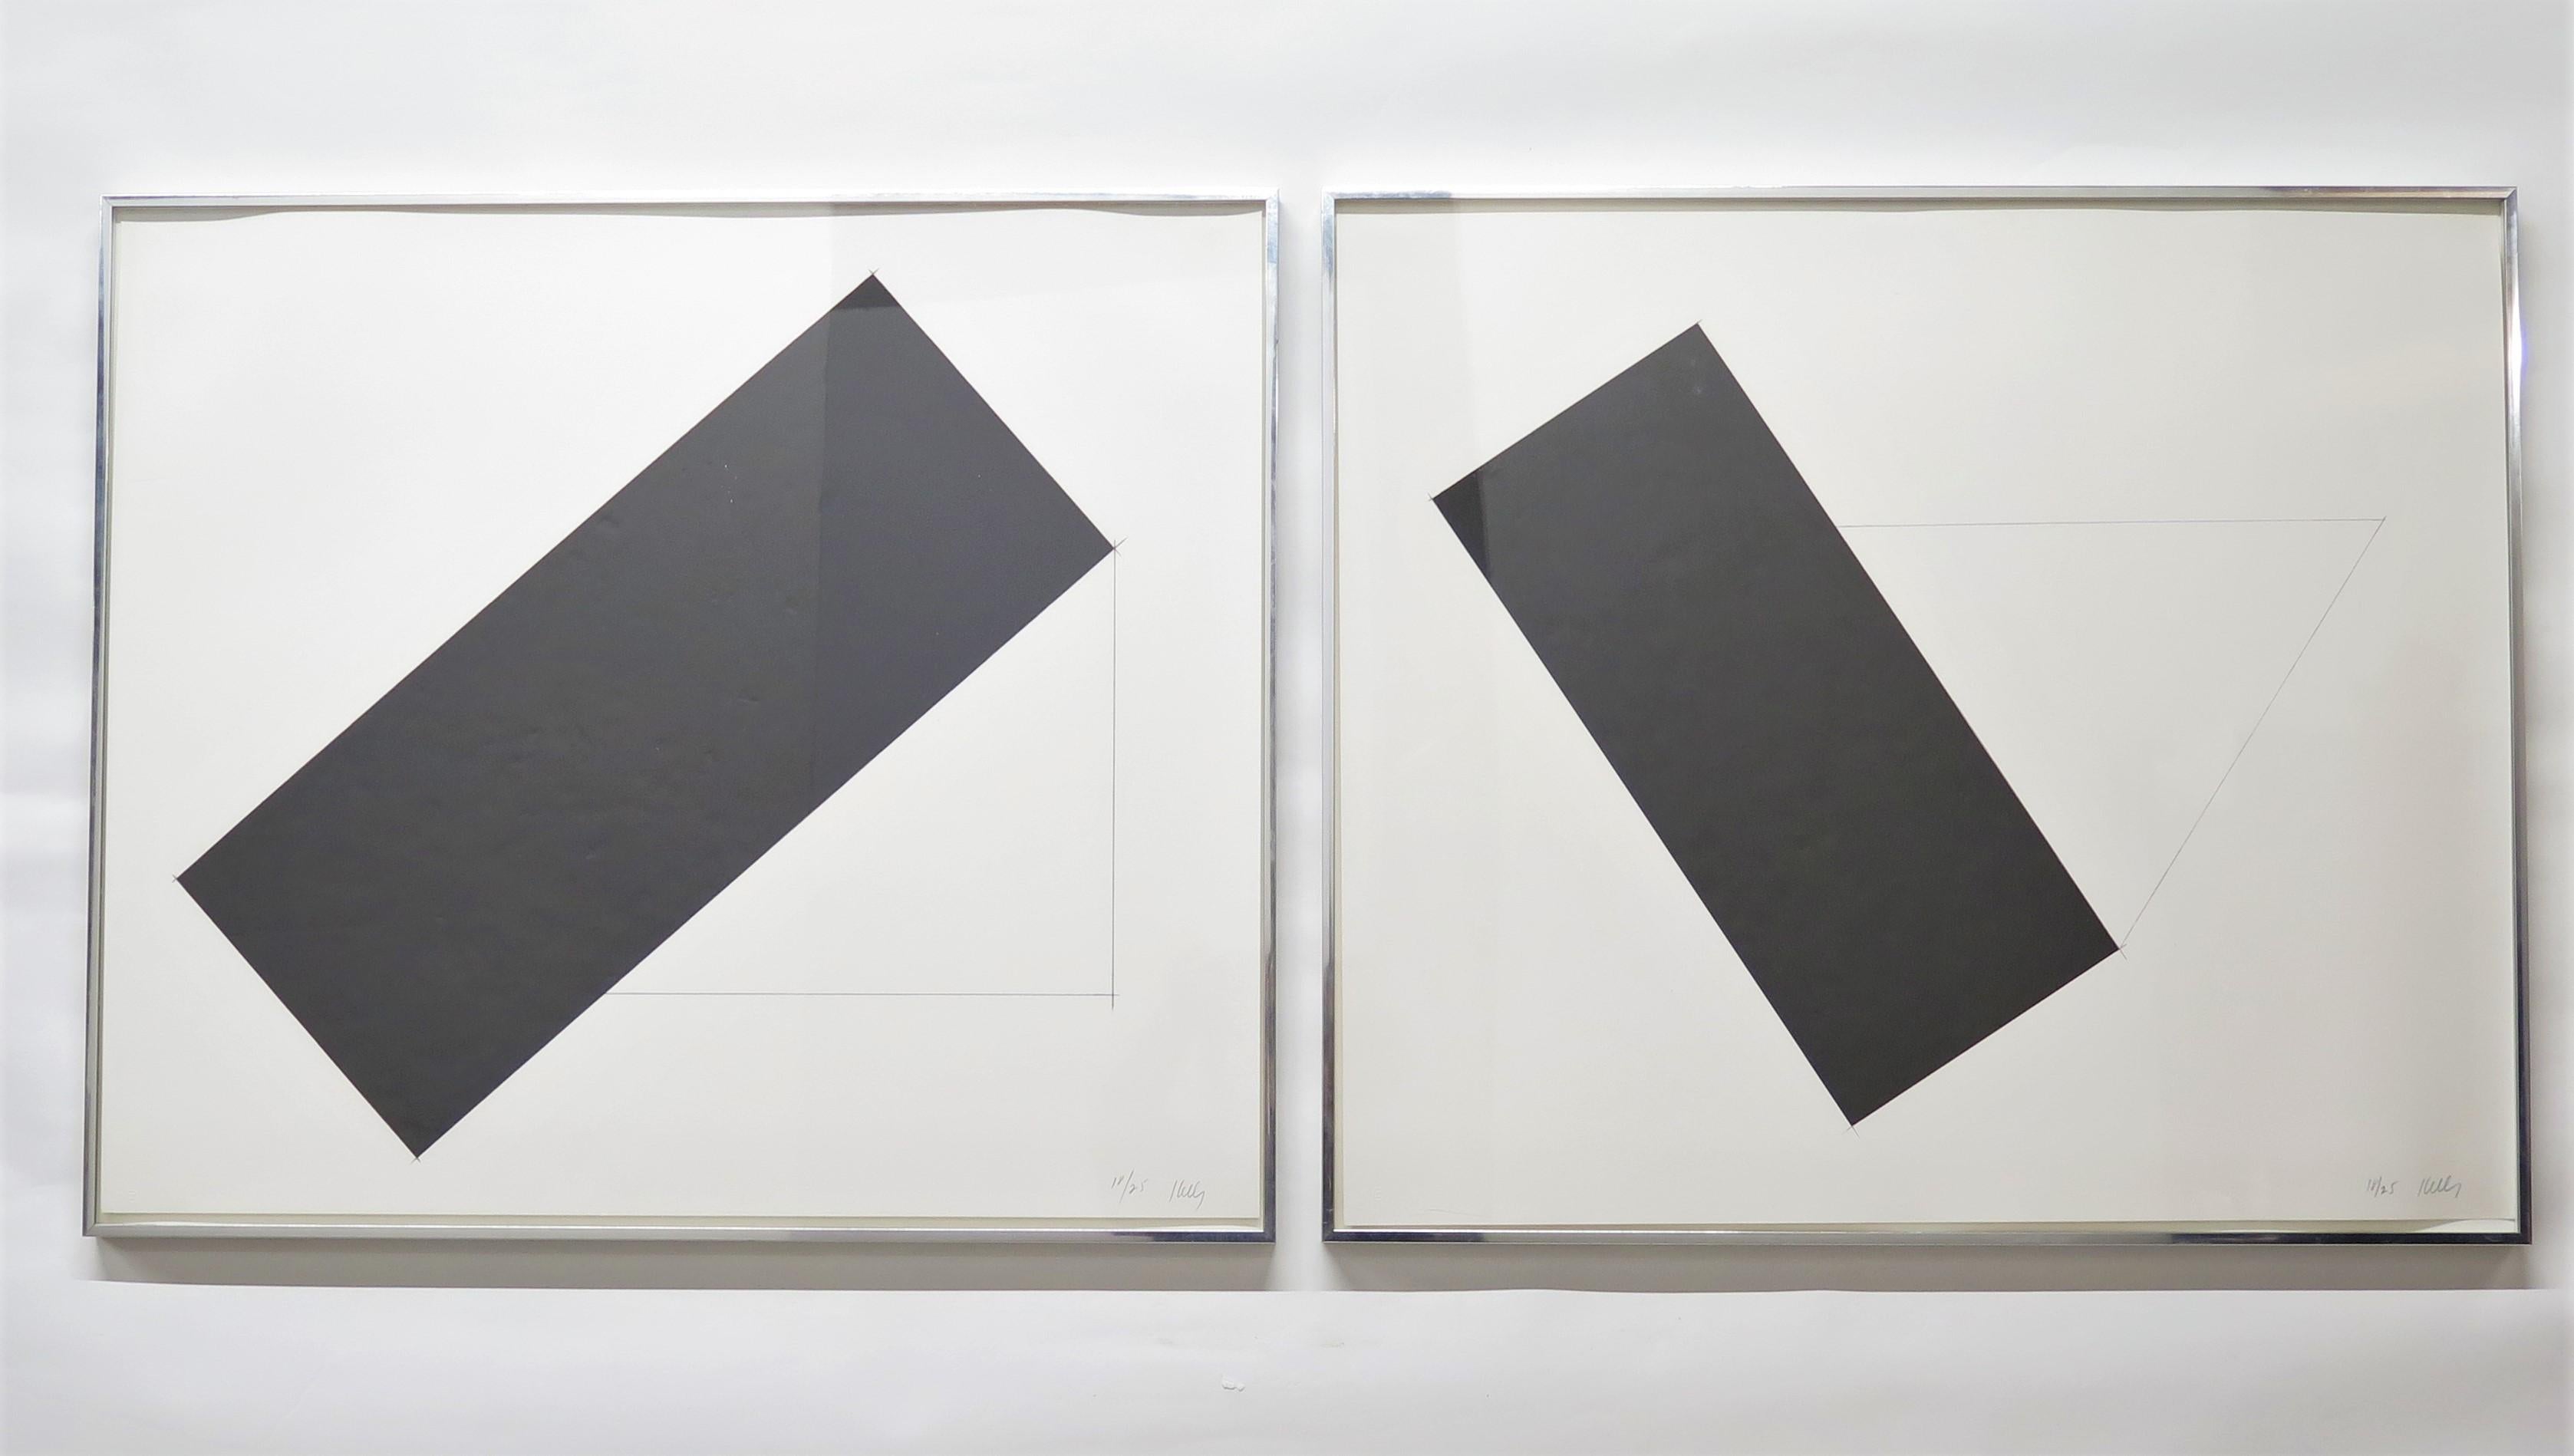 Ellsworth Kelly (American, 1923-2015) GRAND CASE and MARIGOT, 1980 For Sale 2